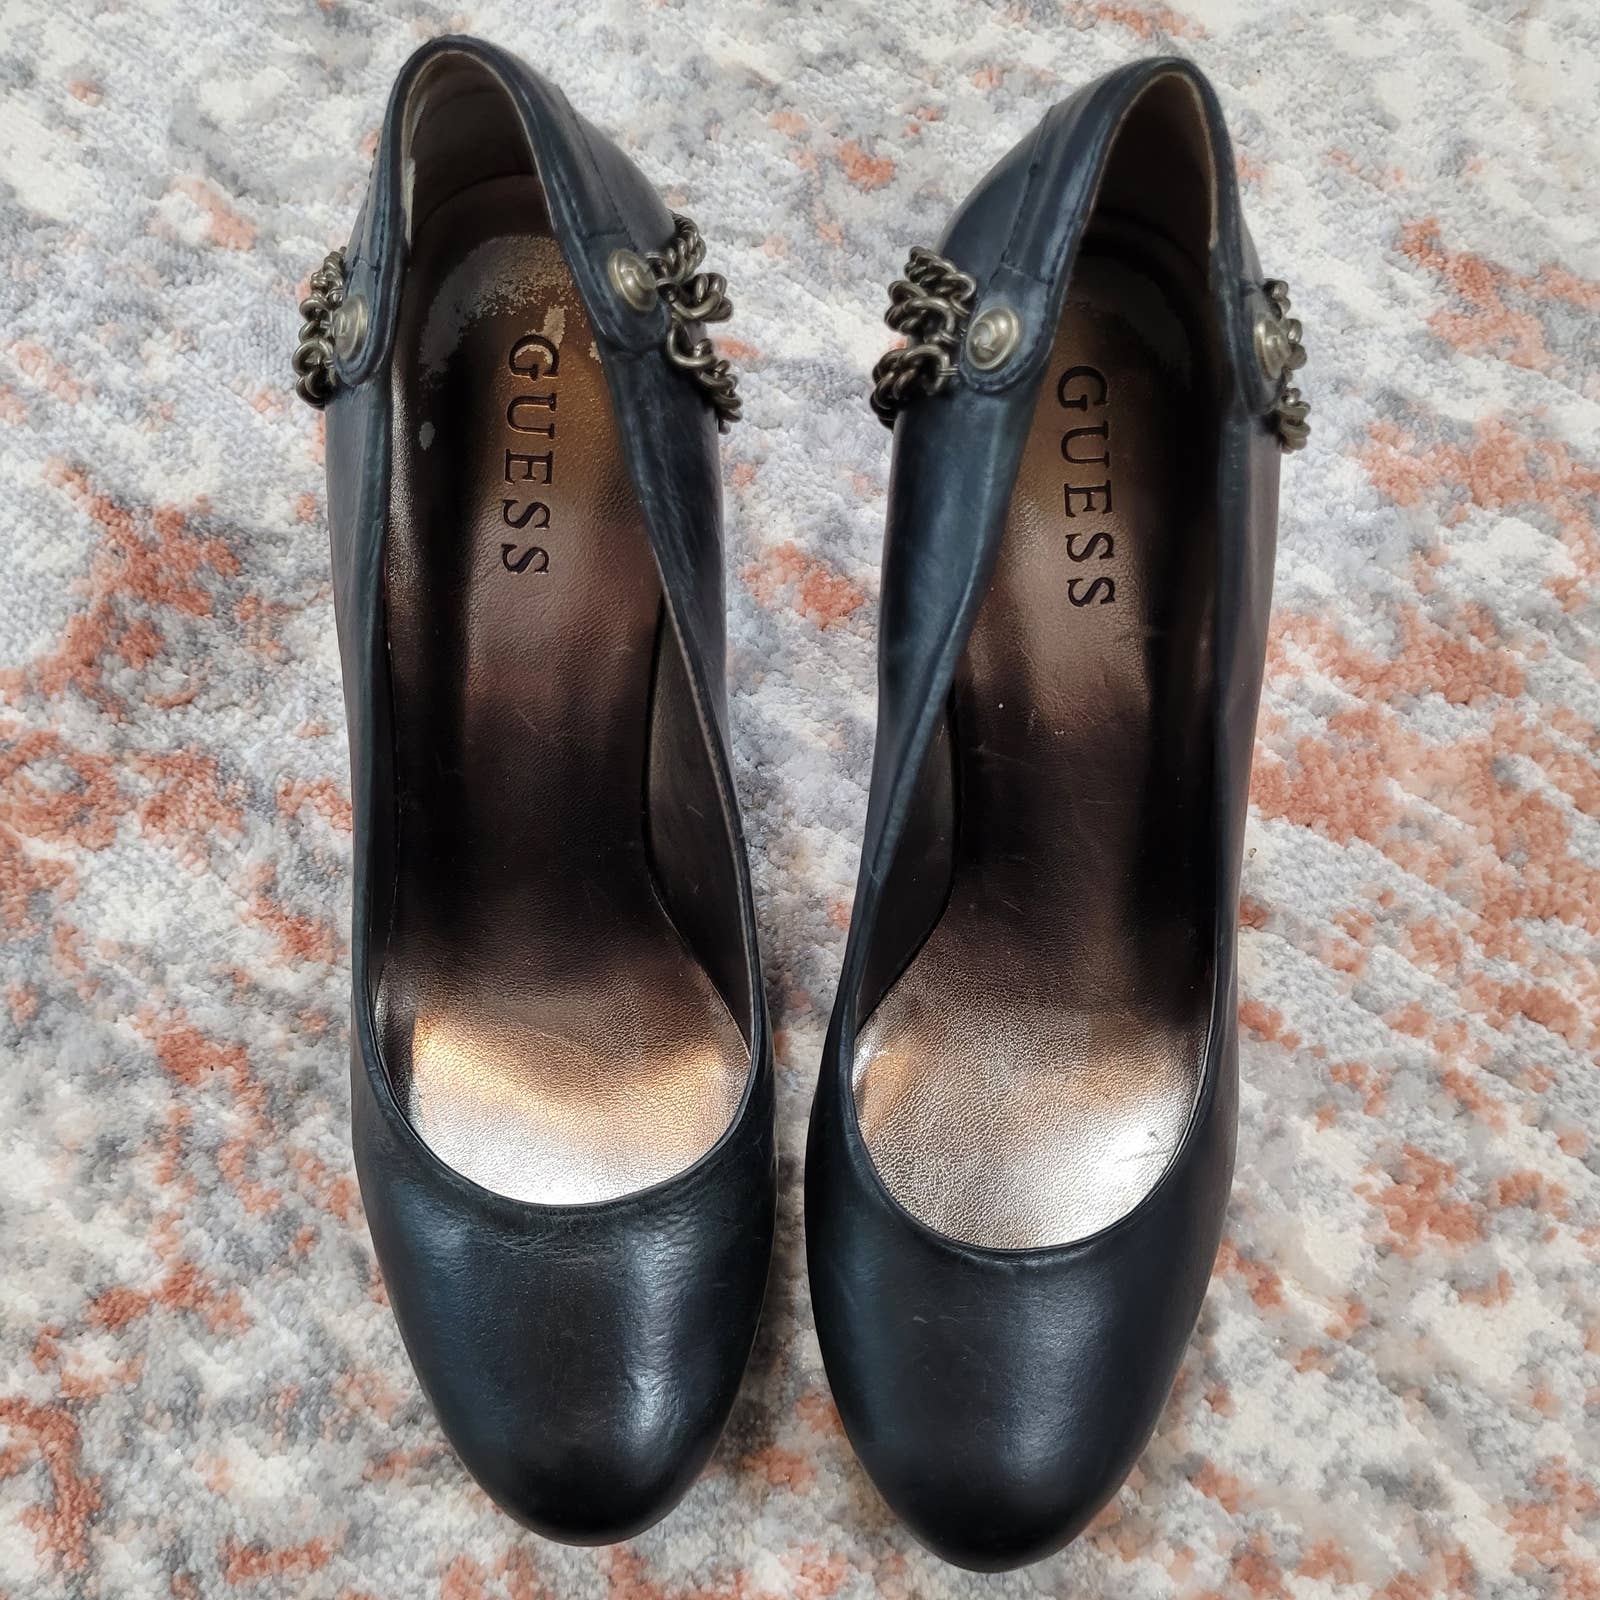 Guess Seeri Black Leather Platform Heels with 3 Chain Accent - Size 7.5Markita's ClosetGUESS